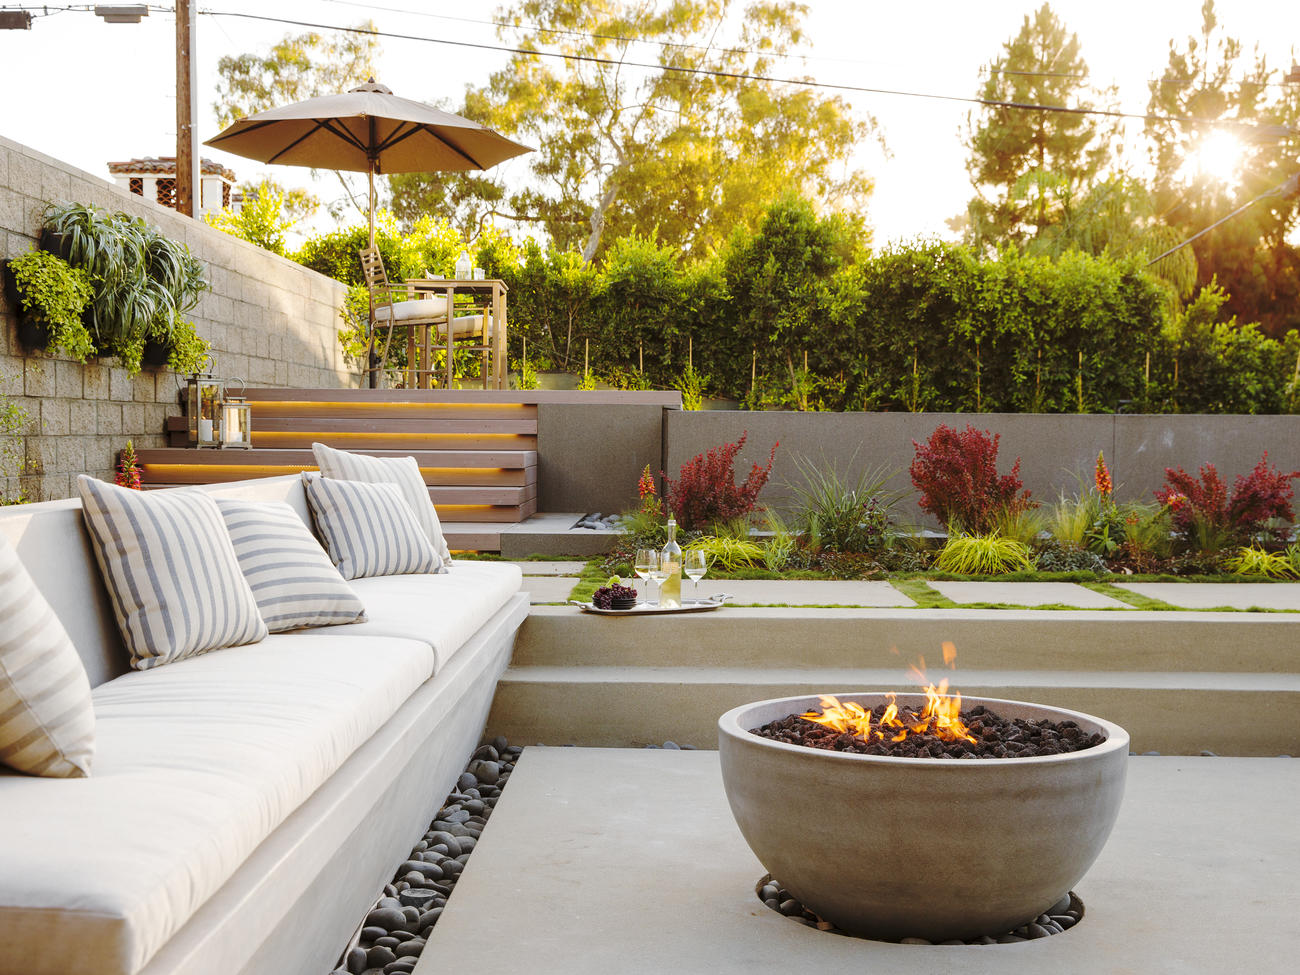 Sunset Makeover: 5 Stunning Ideas for Outdoor Rooms